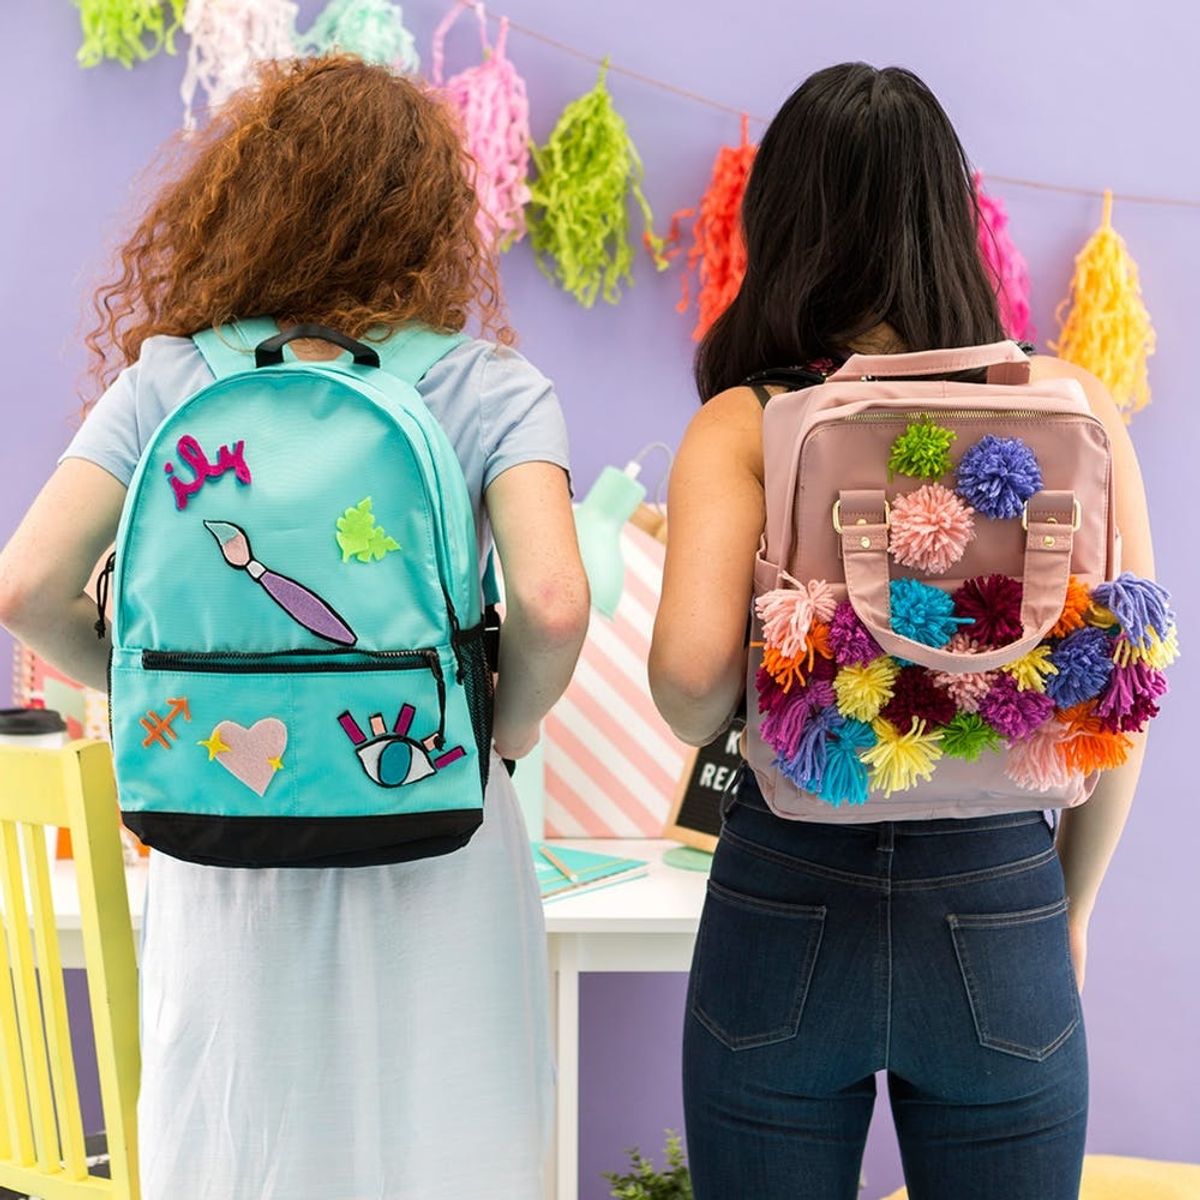 Make These 2 Backpack DIYs for the Best Back-to-School Season